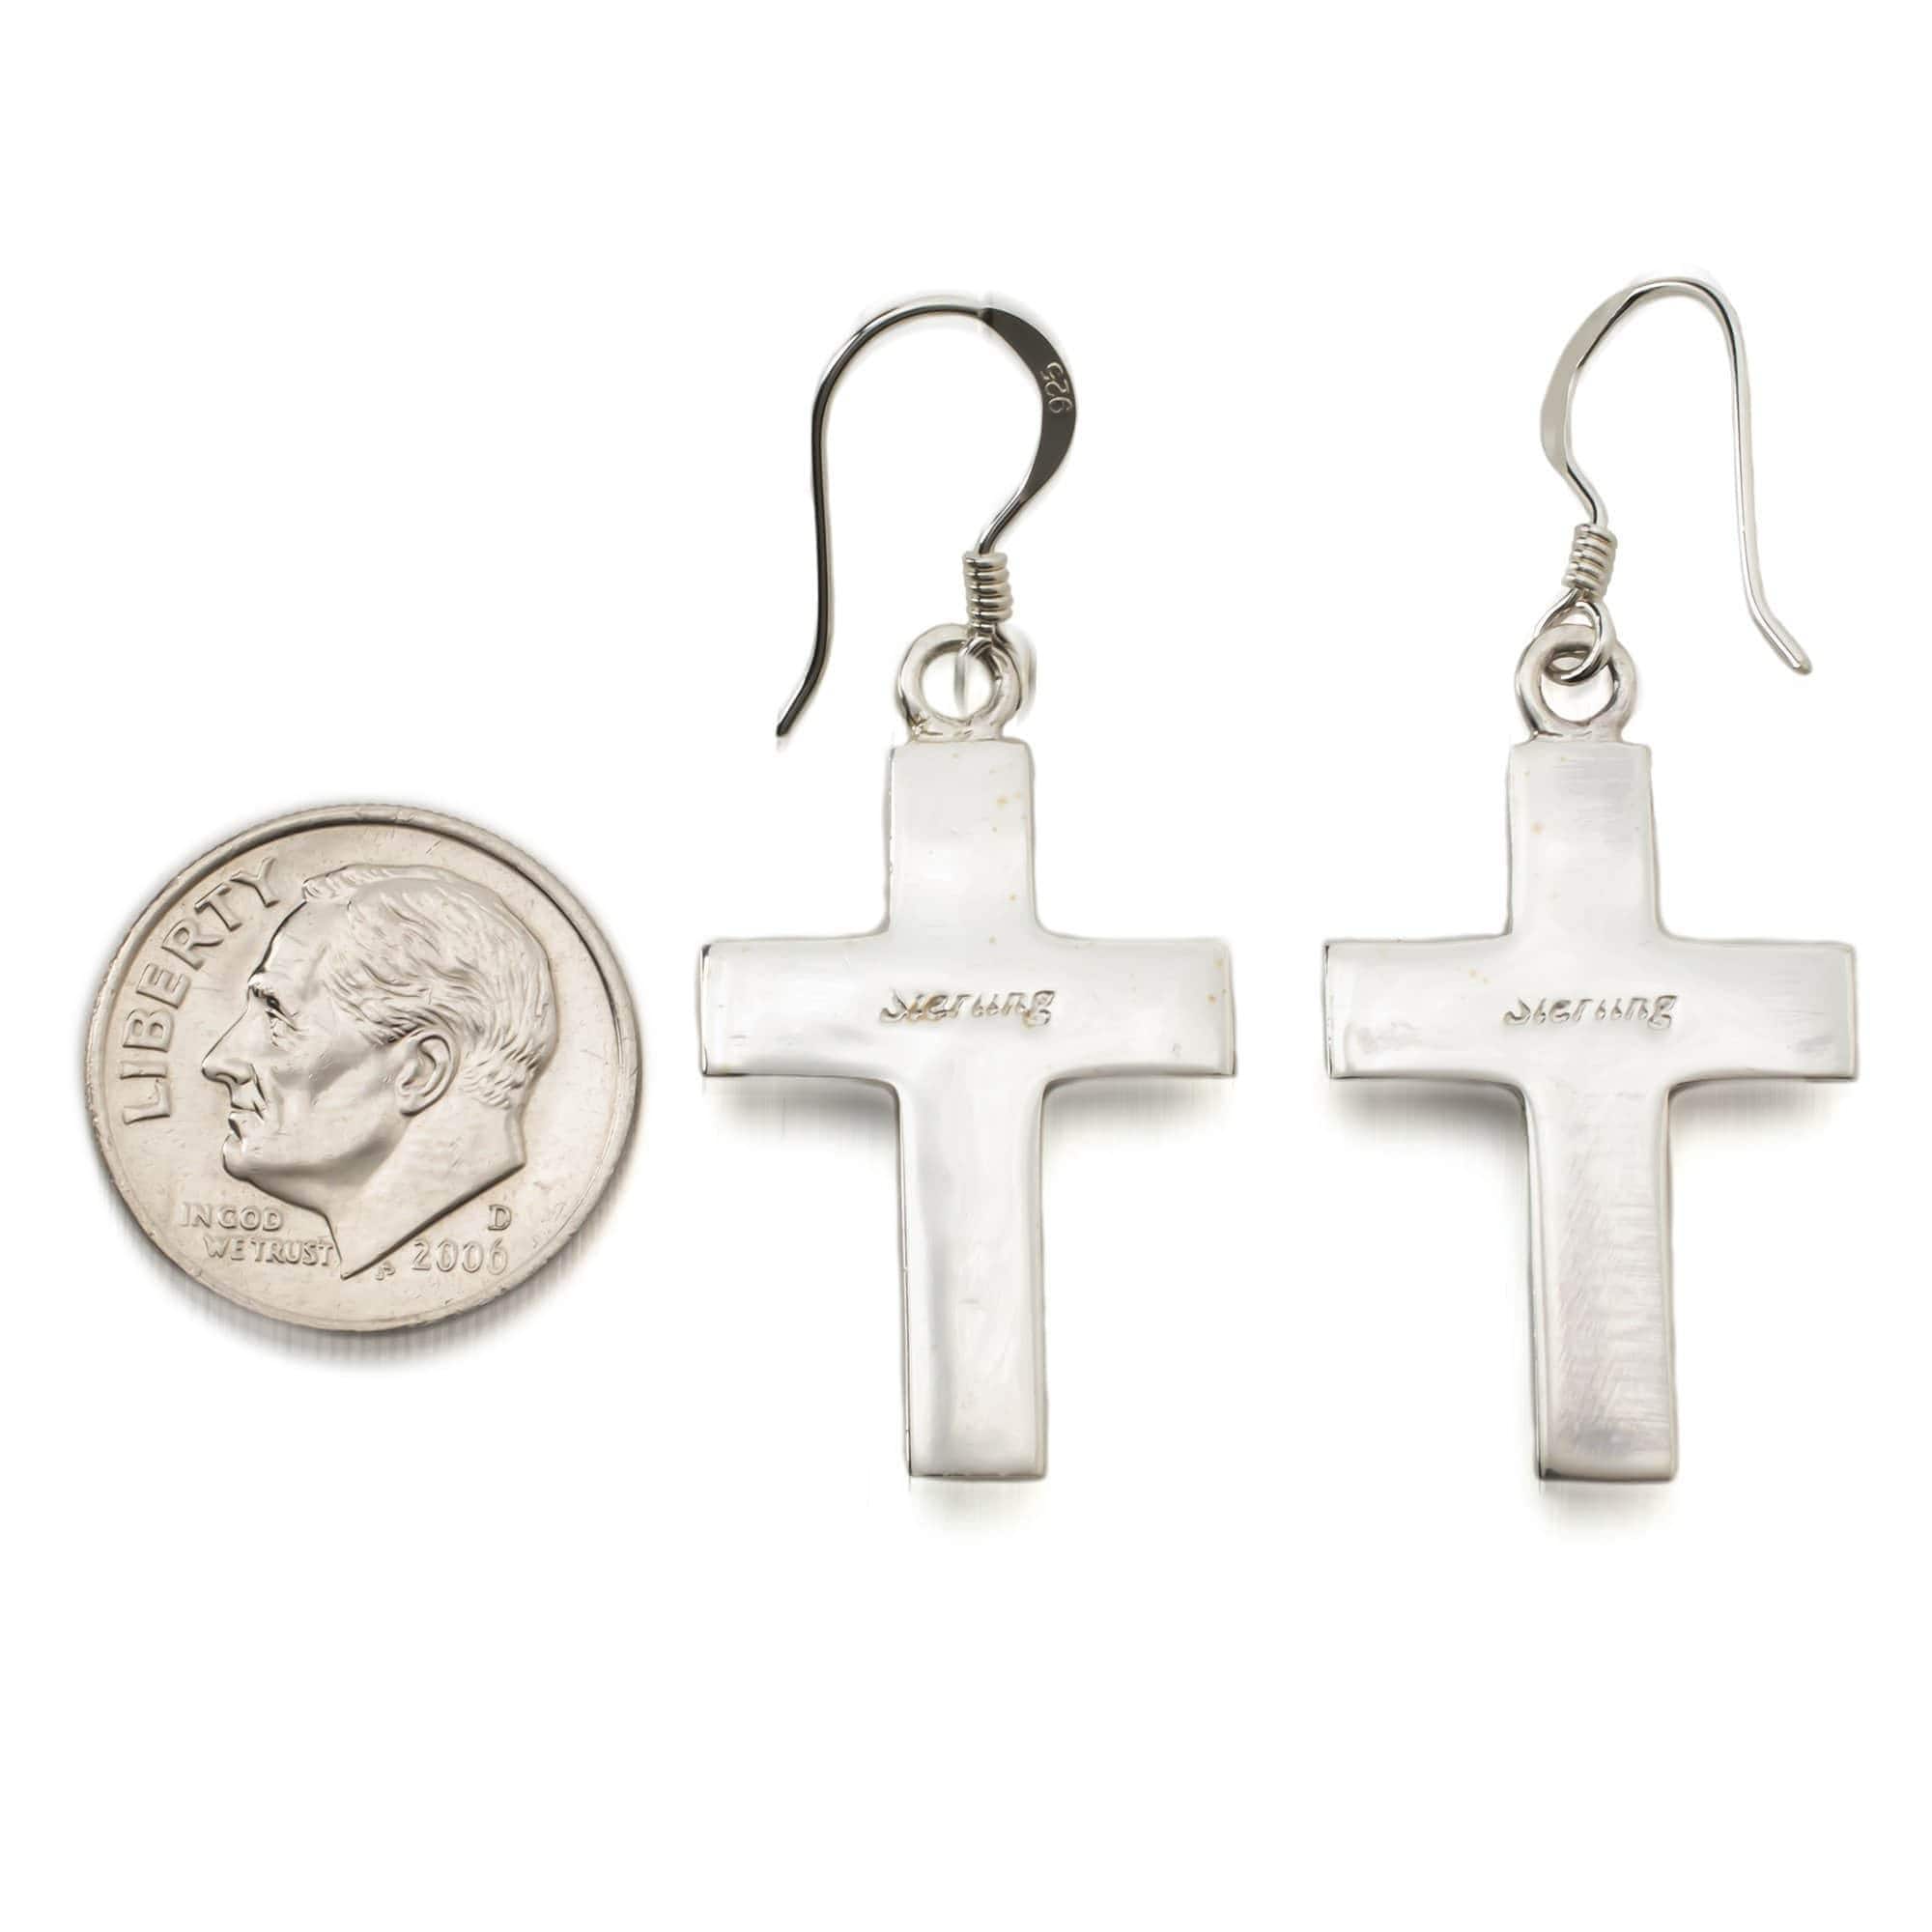 Kalifano Southwest Silver Jewelry Turquoise Cross 925 Sterling Silver Earring with French Hook USA Handmade with Aqua Opal Accent NME.2054.TQ